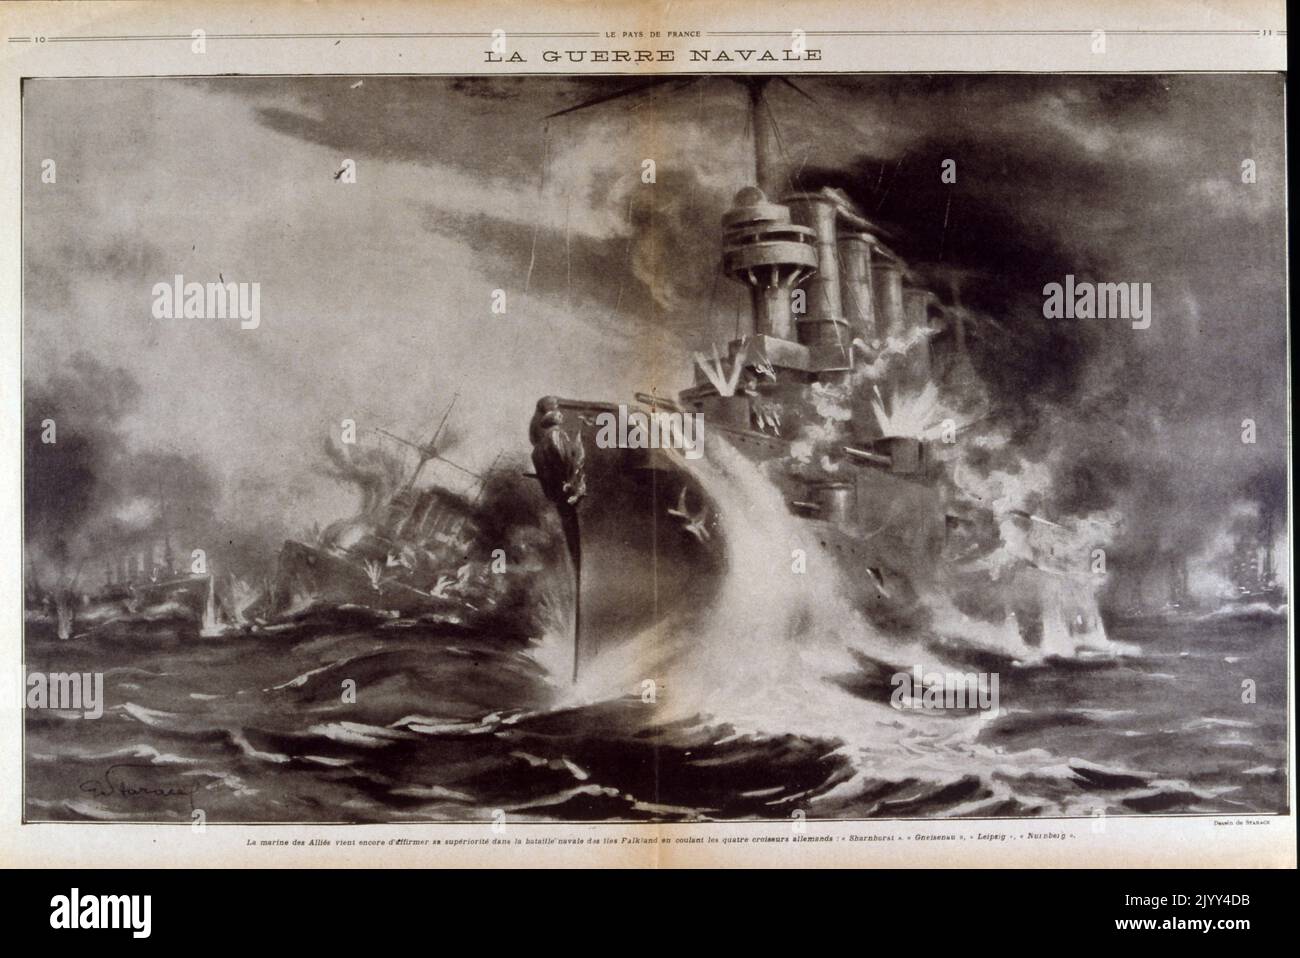 The Battle of the Falkland Islands was a naval action between the British Royal Navy and Imperial German Navy on 8 December 1914, during the First World War in the South Atlantic. The British, after a defeat at the Battle of Coronel on 1 November, sent a large force to track down and destroy the victorious German cruiser squadron Stock Photo